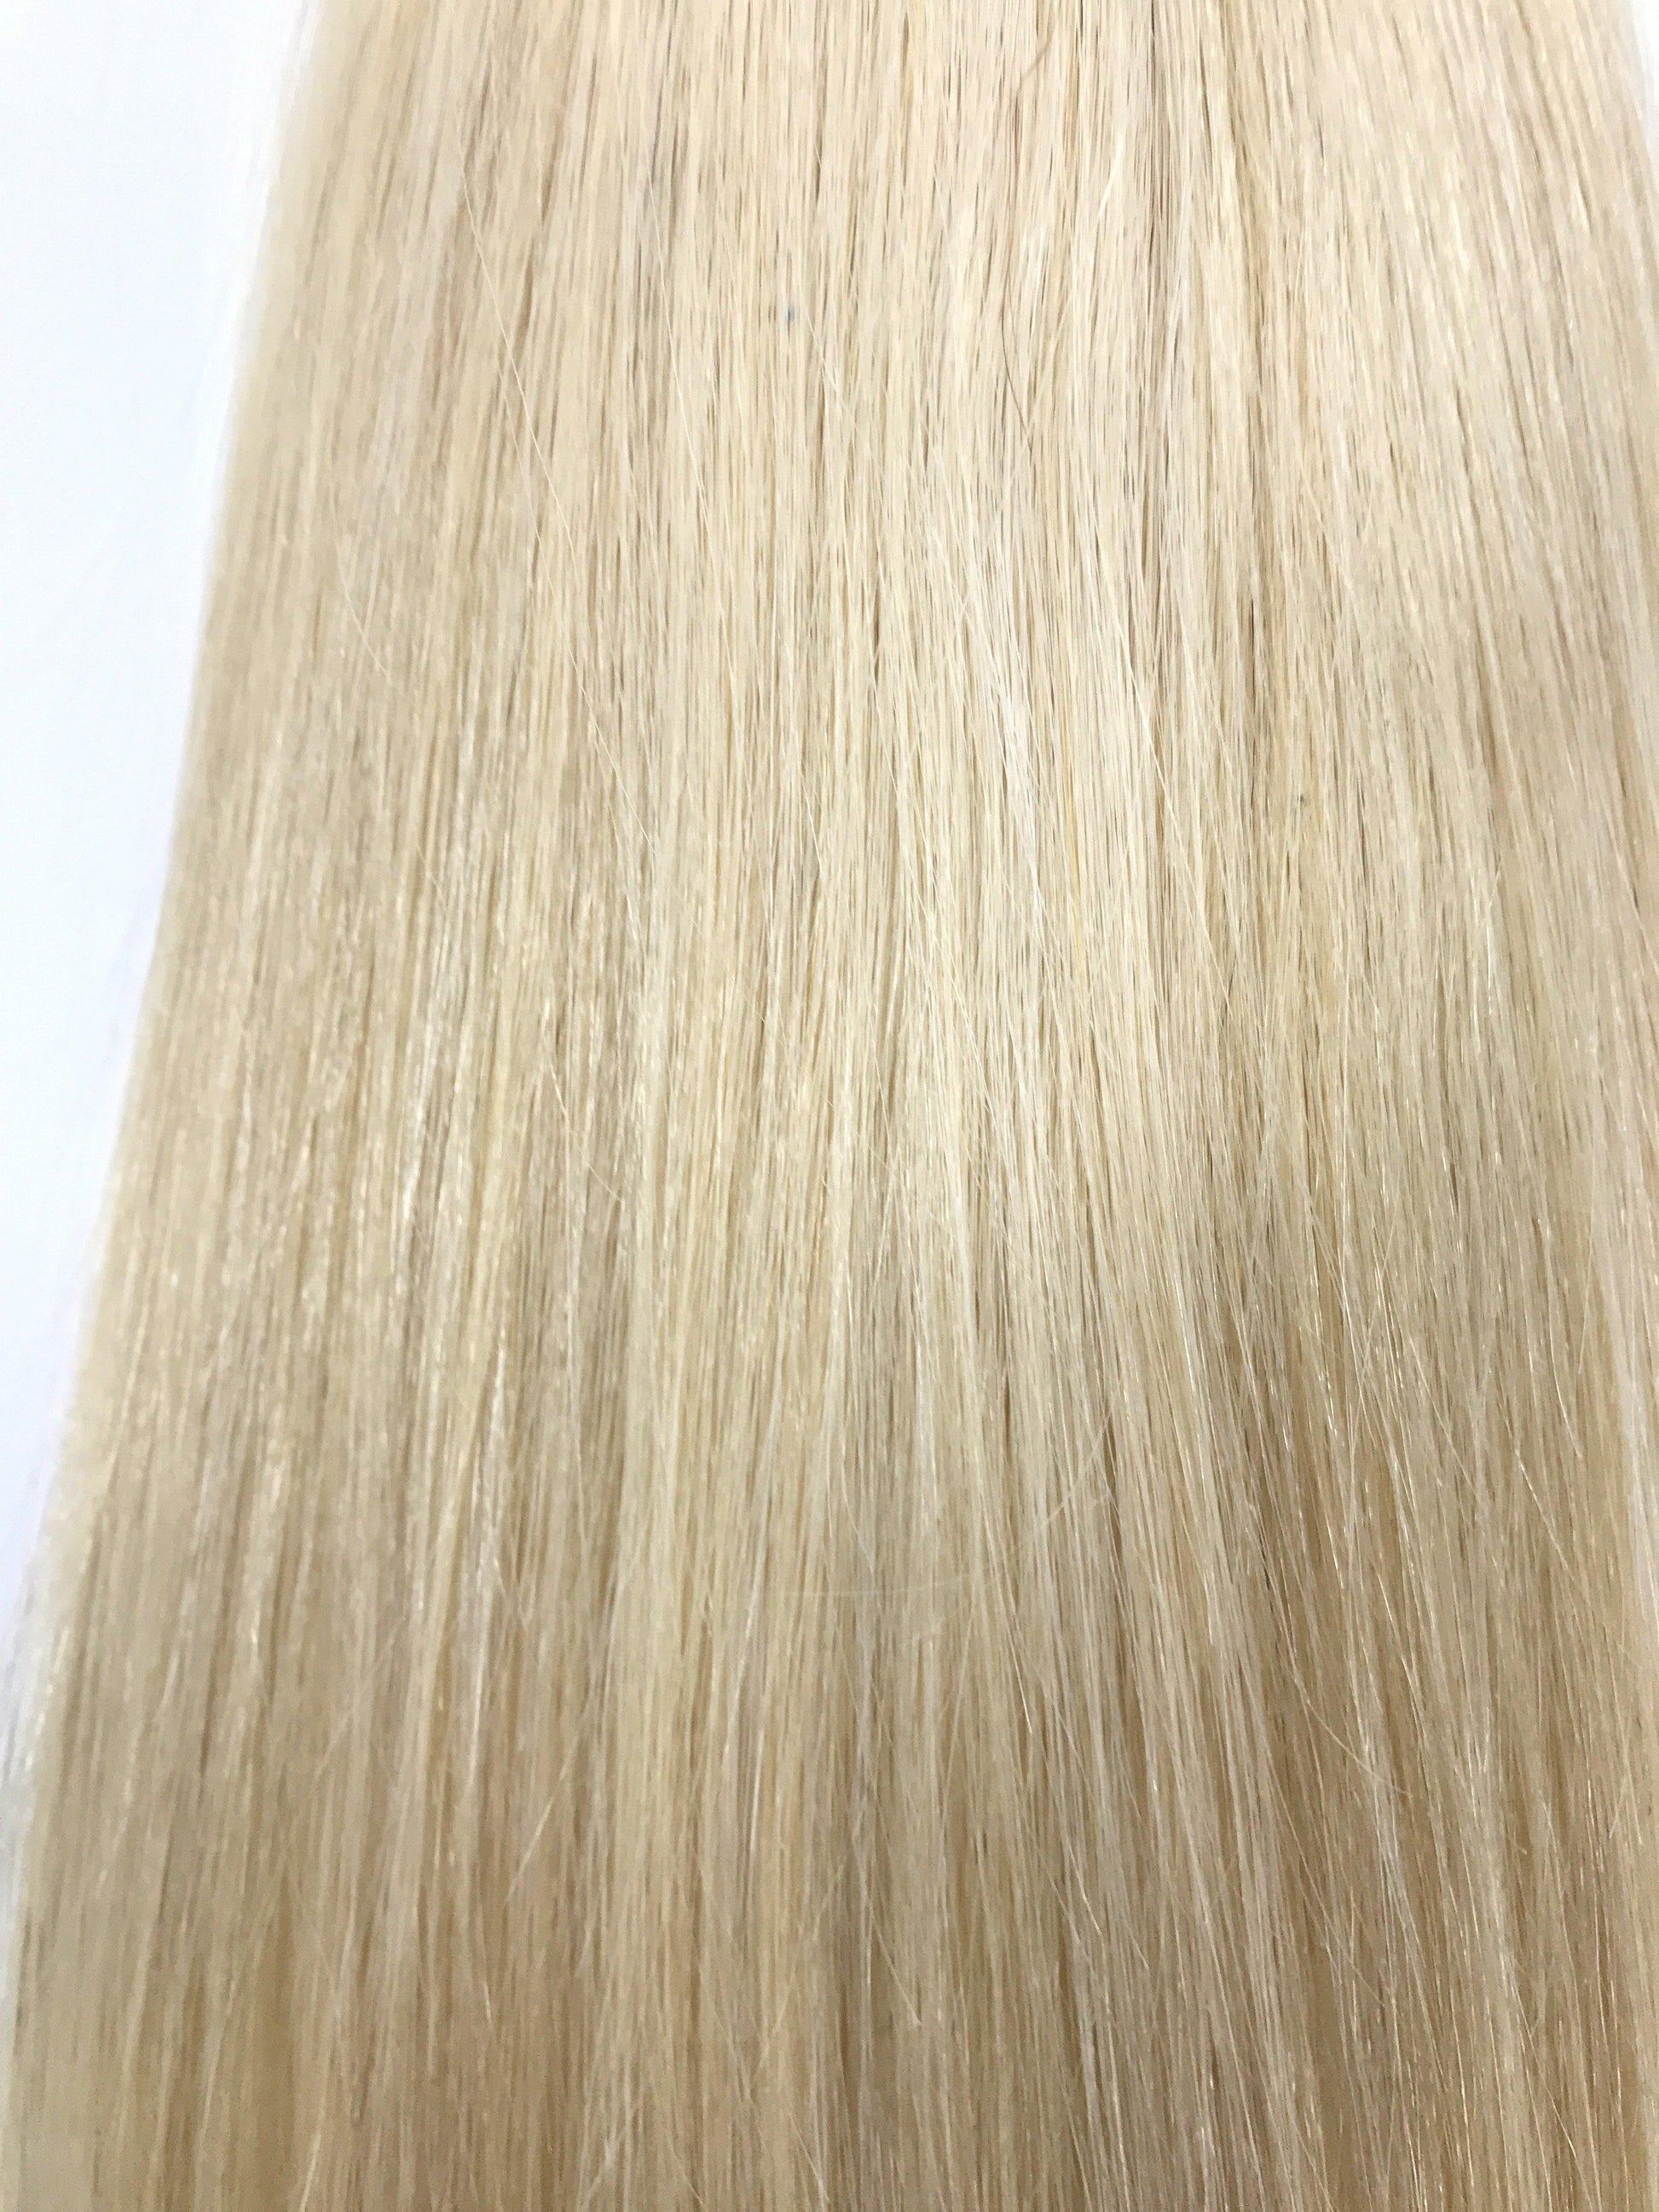 Russian Virgin Remy Human Hair, Tape Extensions, Straight, 22'', Blonde. Quick Shipping!-Virgin Hair & Beauty, The Best Hair Extensions, Real Virgin Human Hair.